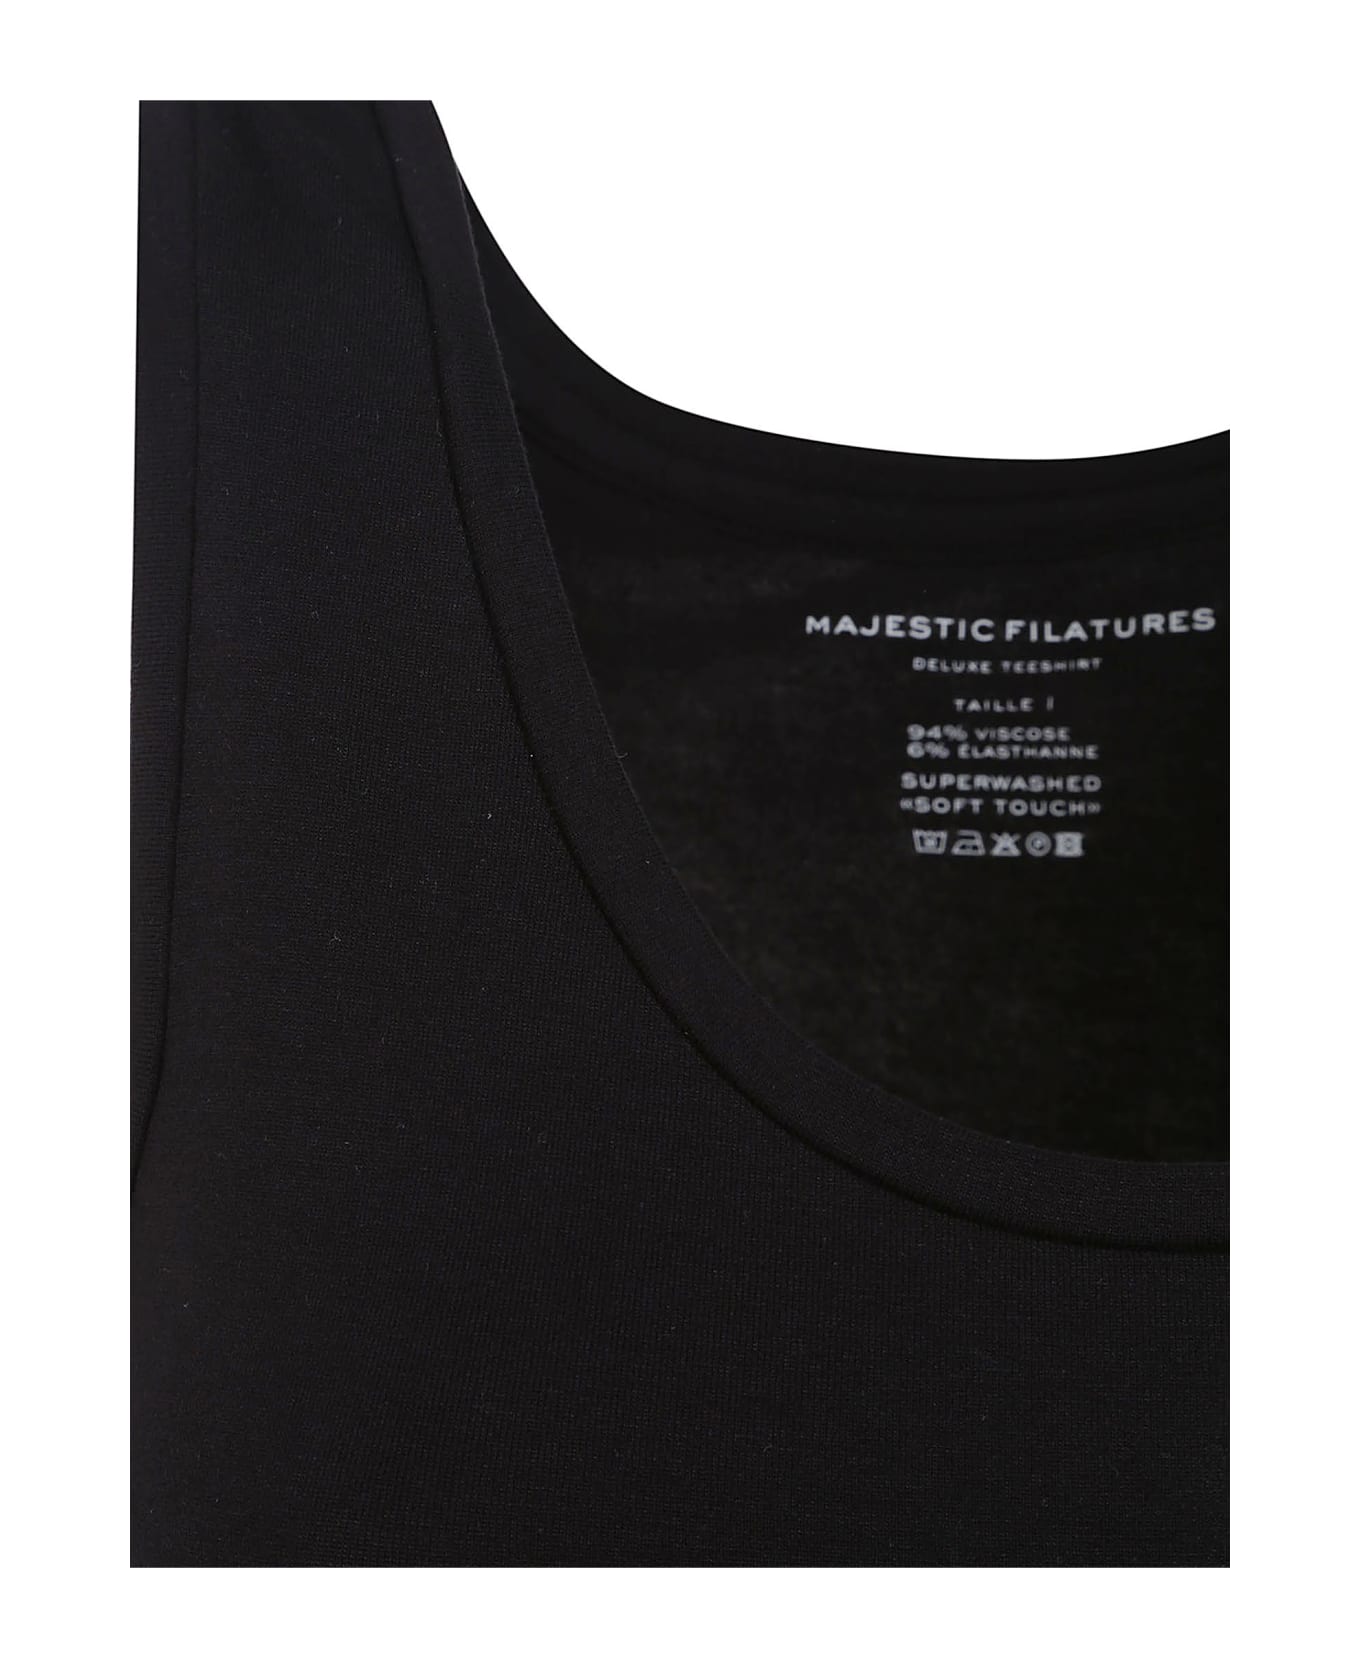 Majestic Filatures Majestic T-shirts And Polos Black - Black